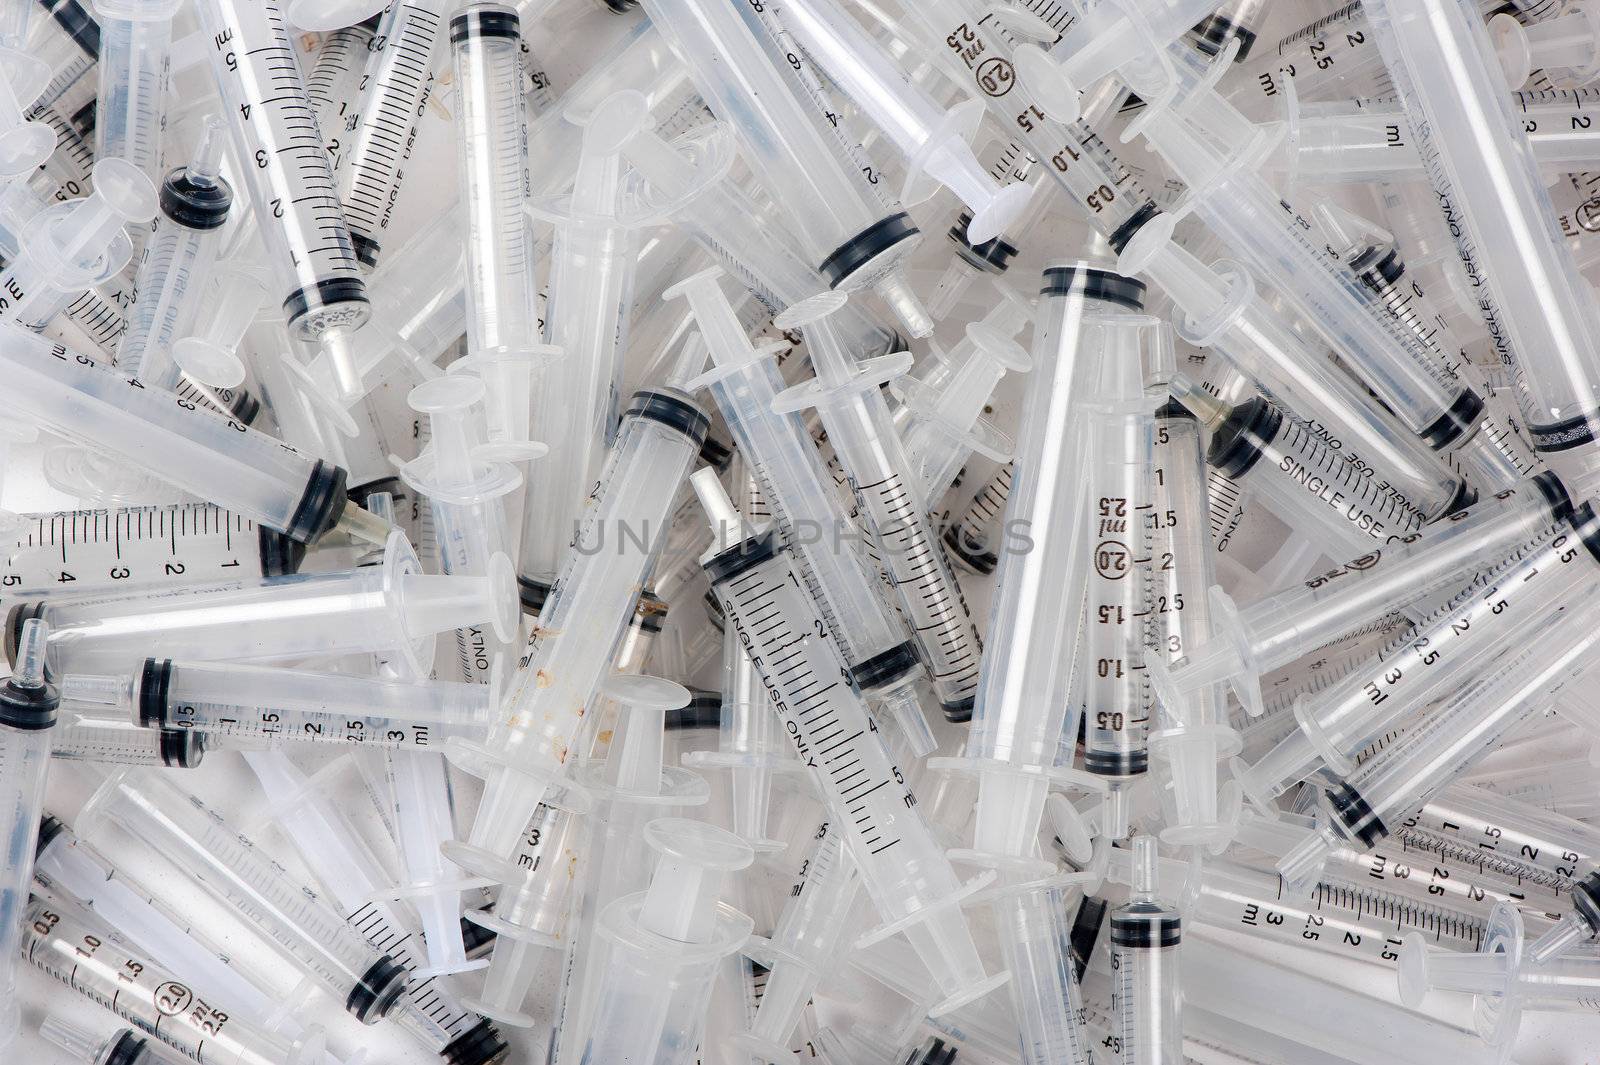 Many used syringes lie strewn on a flat surface.